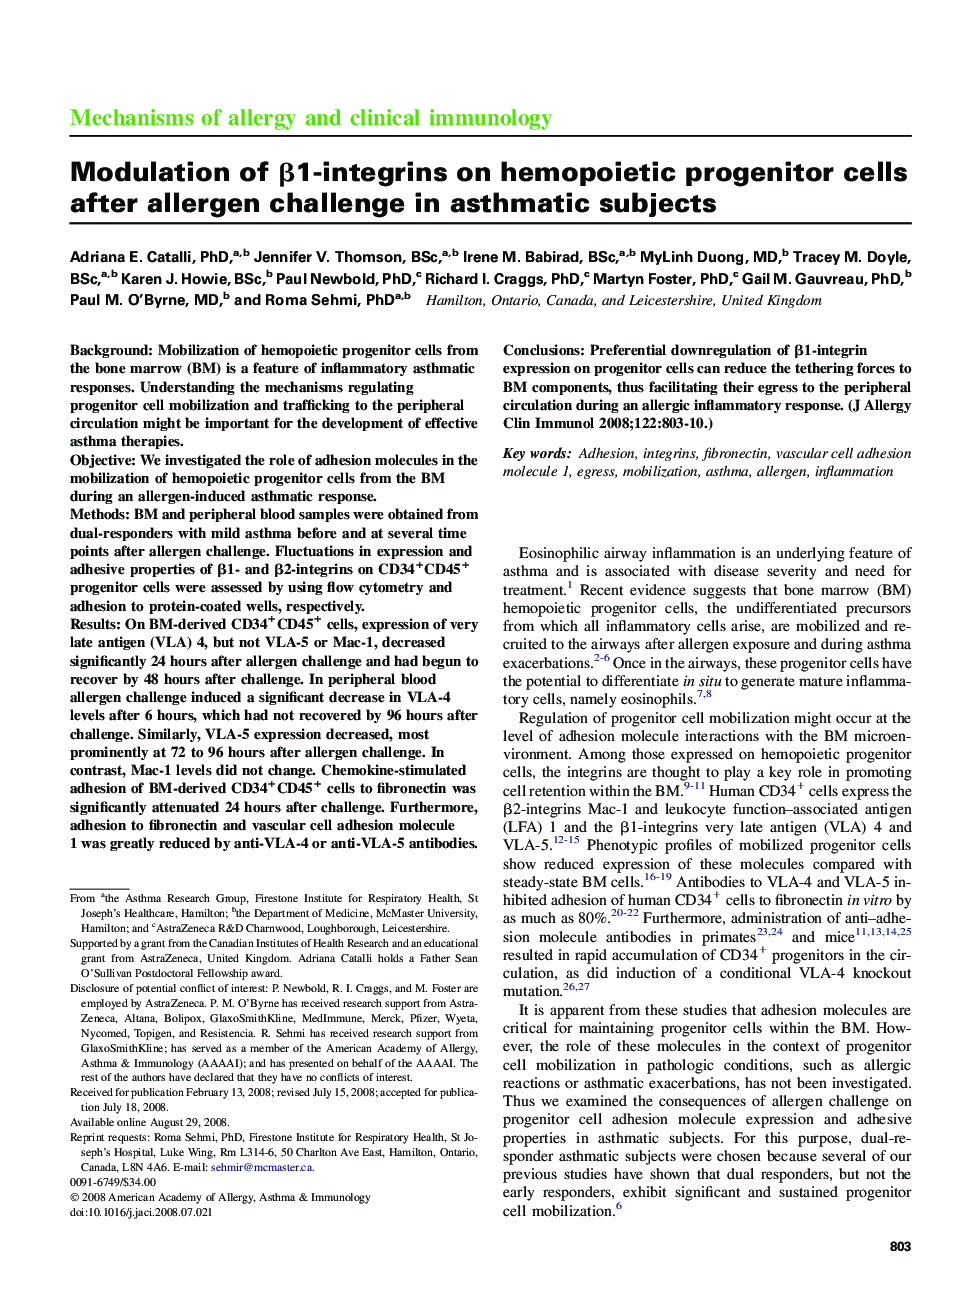 Modulation of β1-integrins on hemopoietic progenitor cells after allergen challenge in asthmatic subjects 